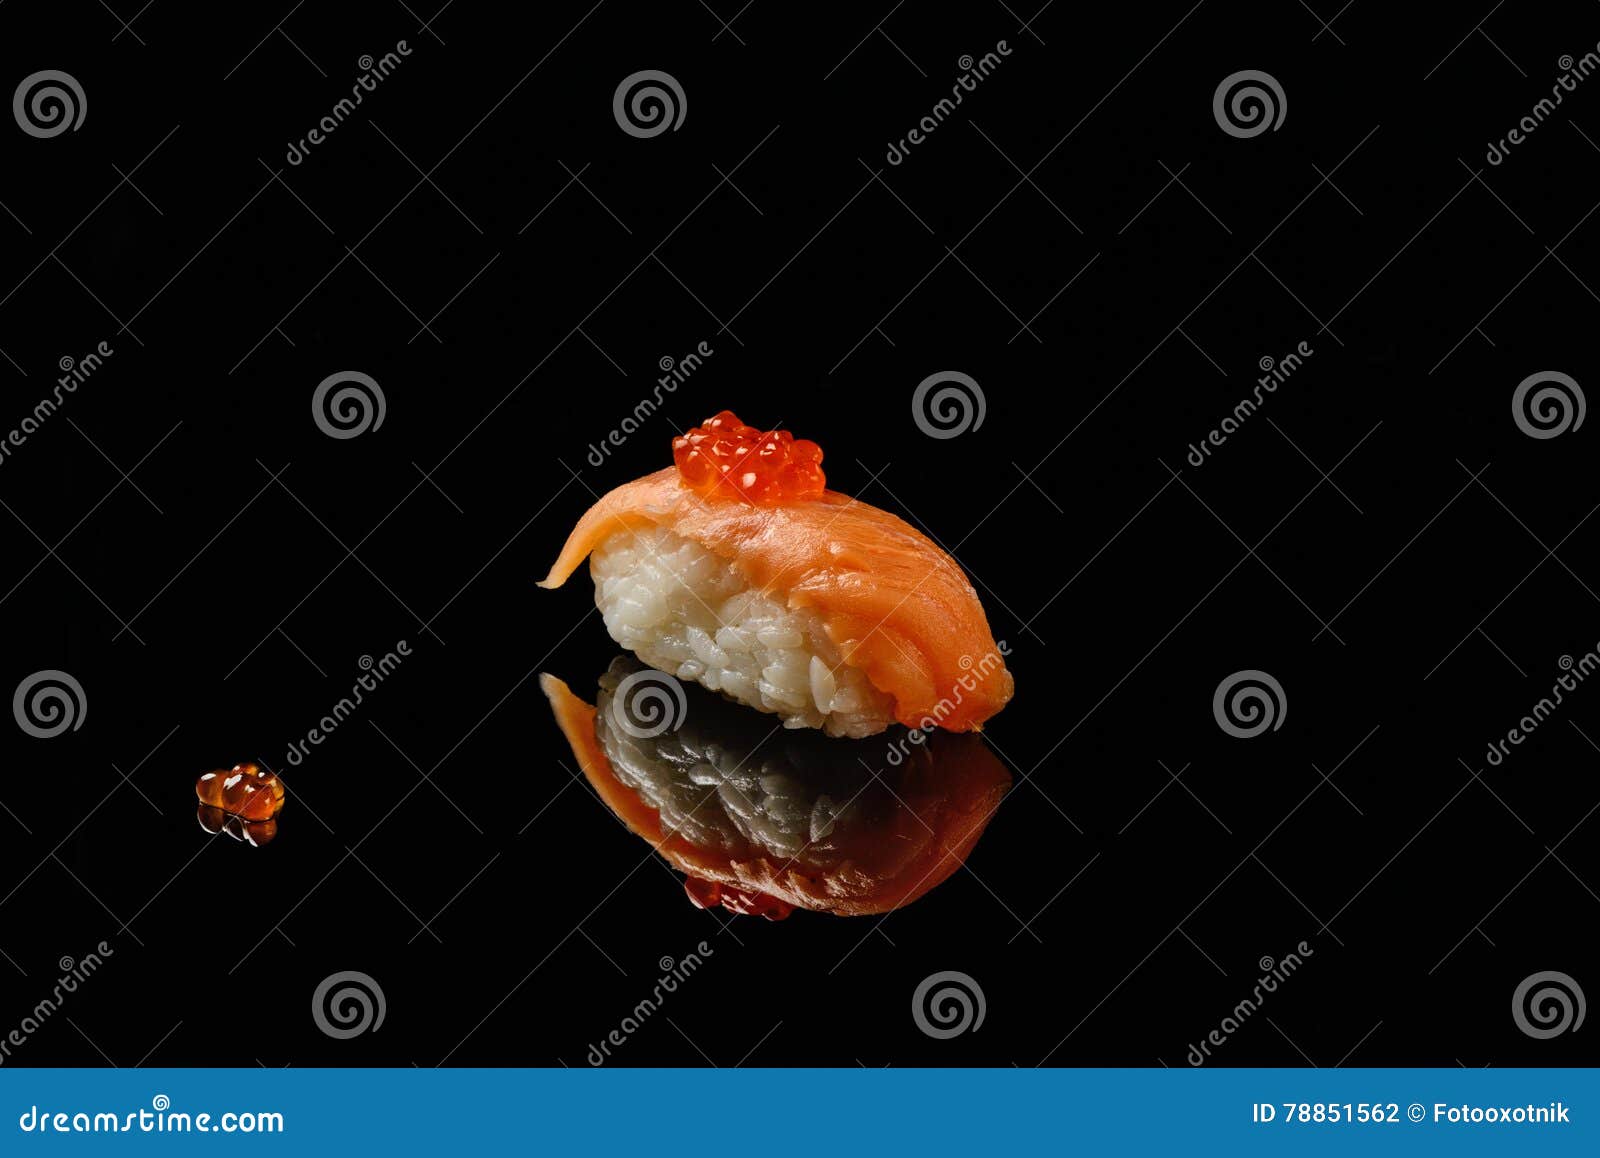 sushi and red caviar on black acryle with reflection